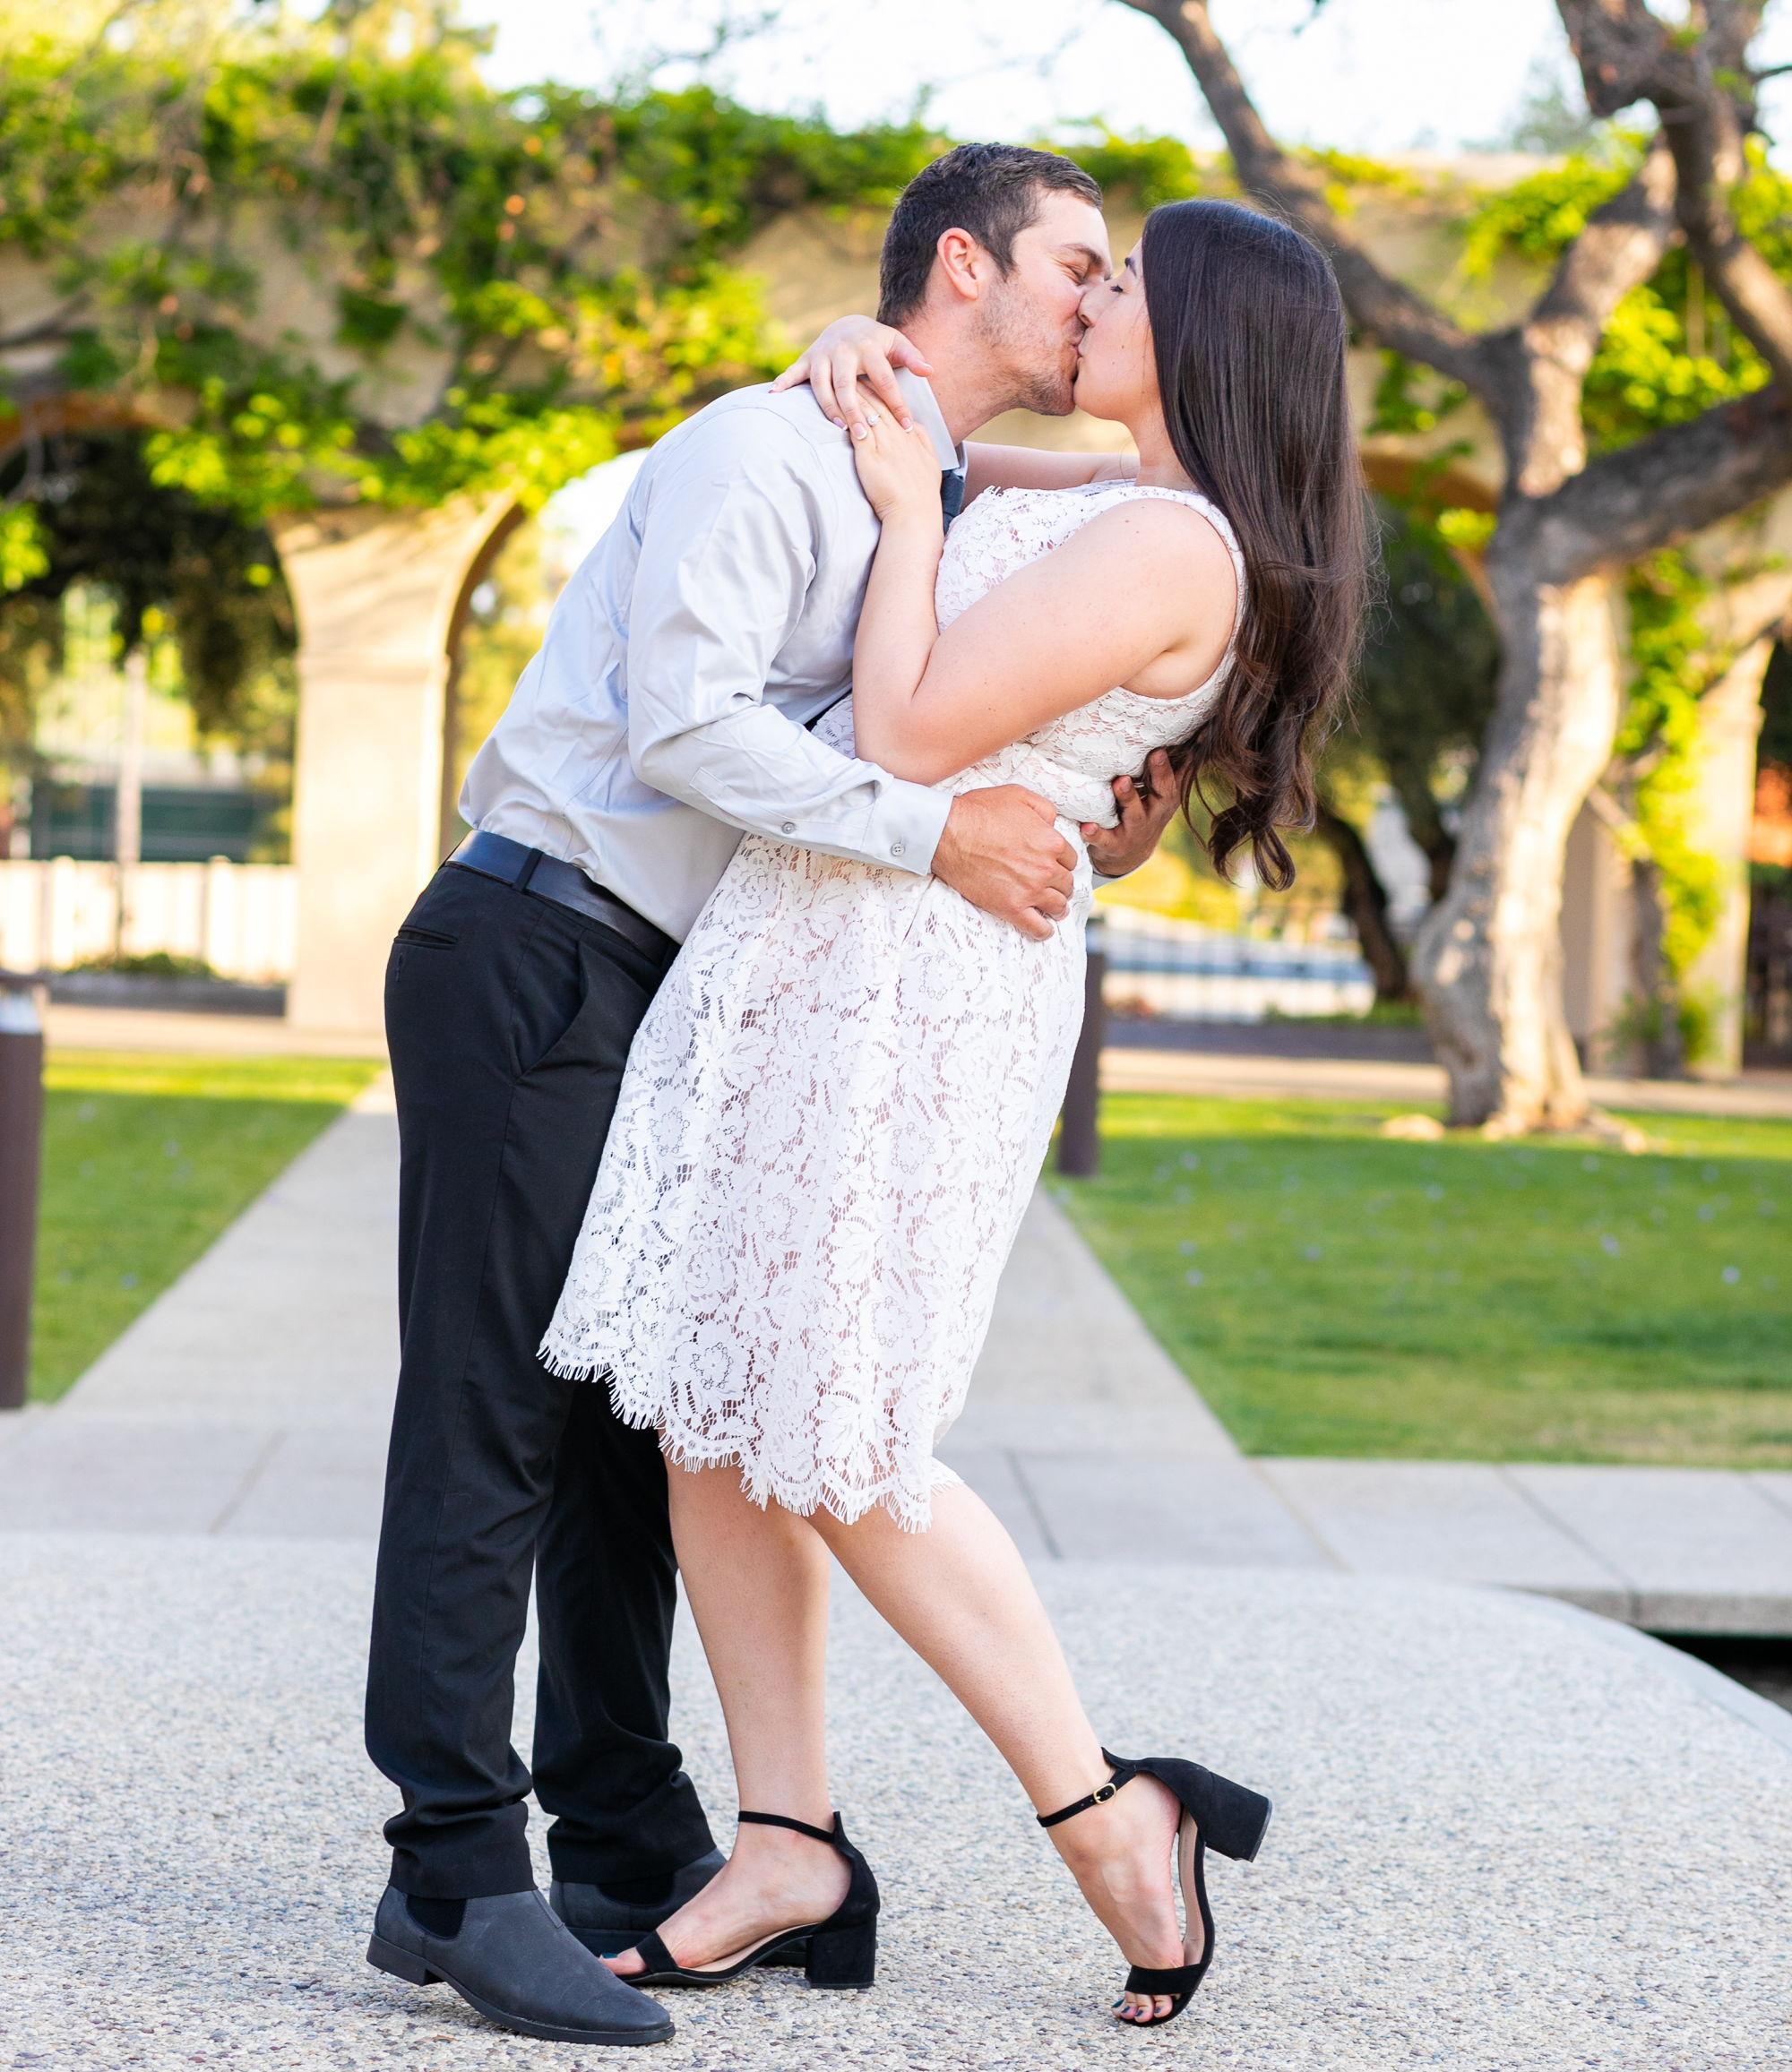 The Wedding Website of Hayley Barron and Nabeal Amer